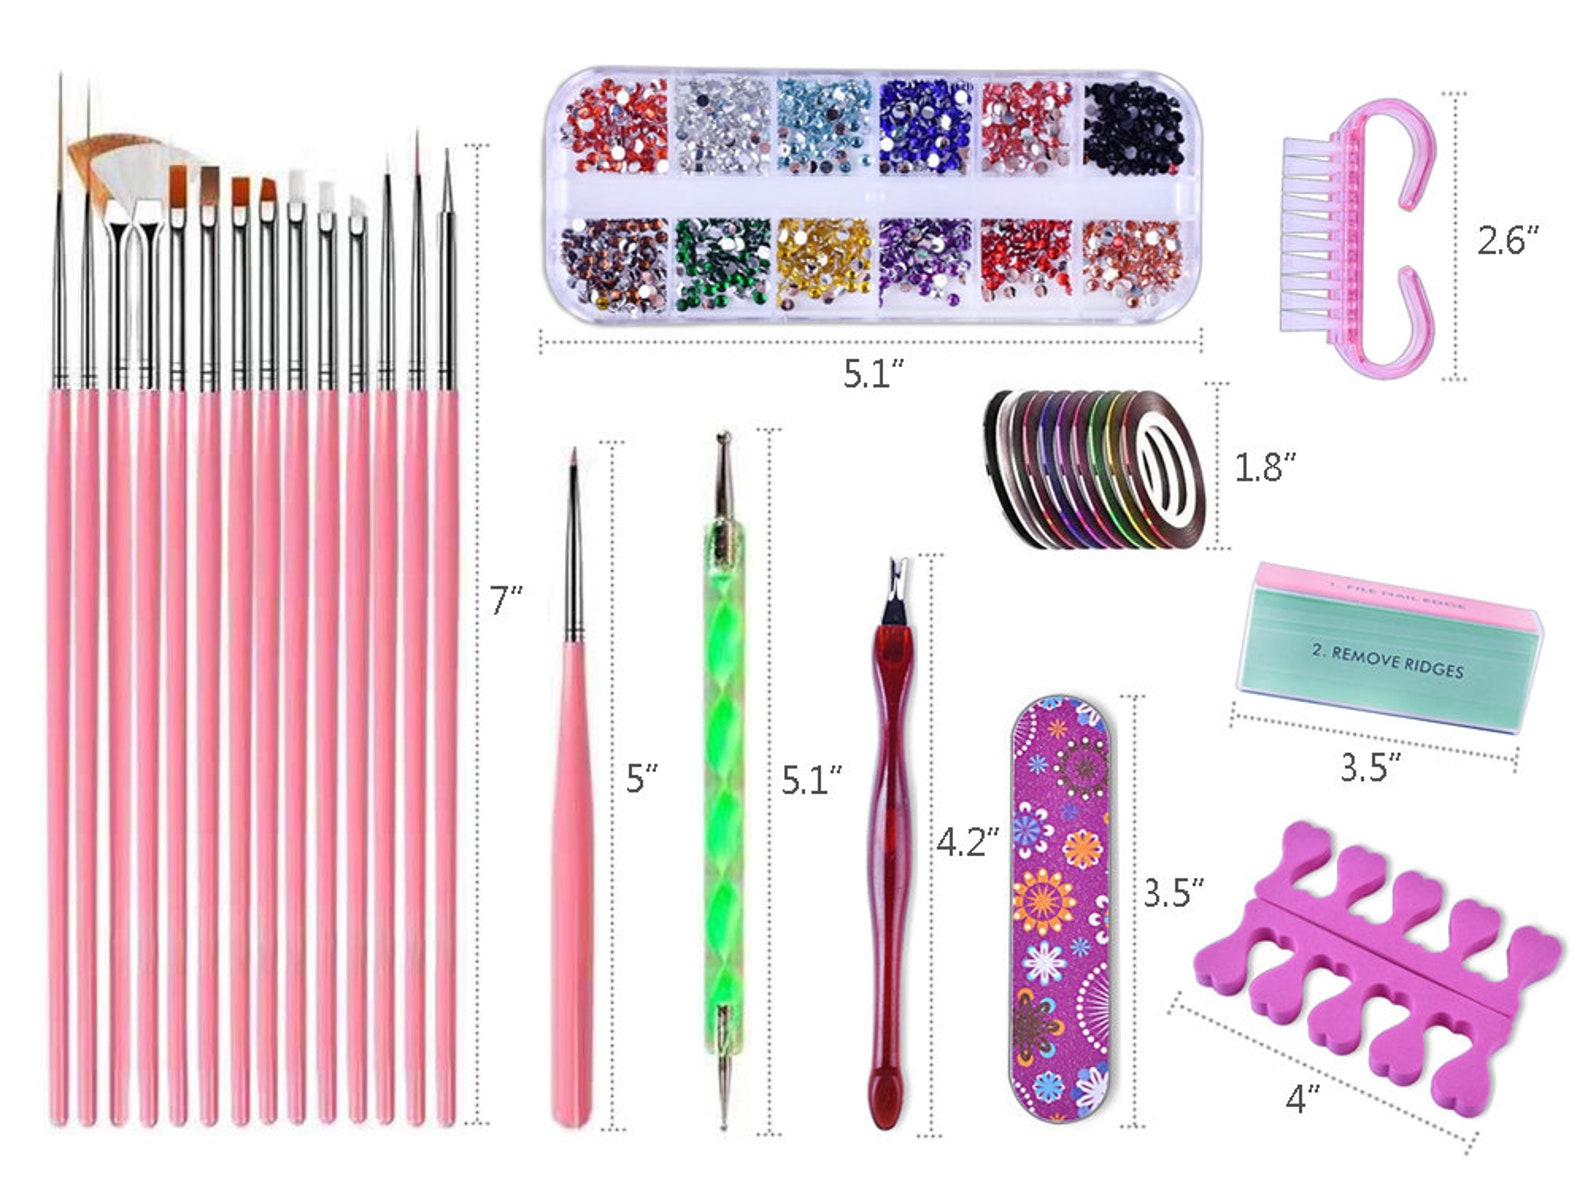 9. Nail Art Kit for Beginners - wide 5